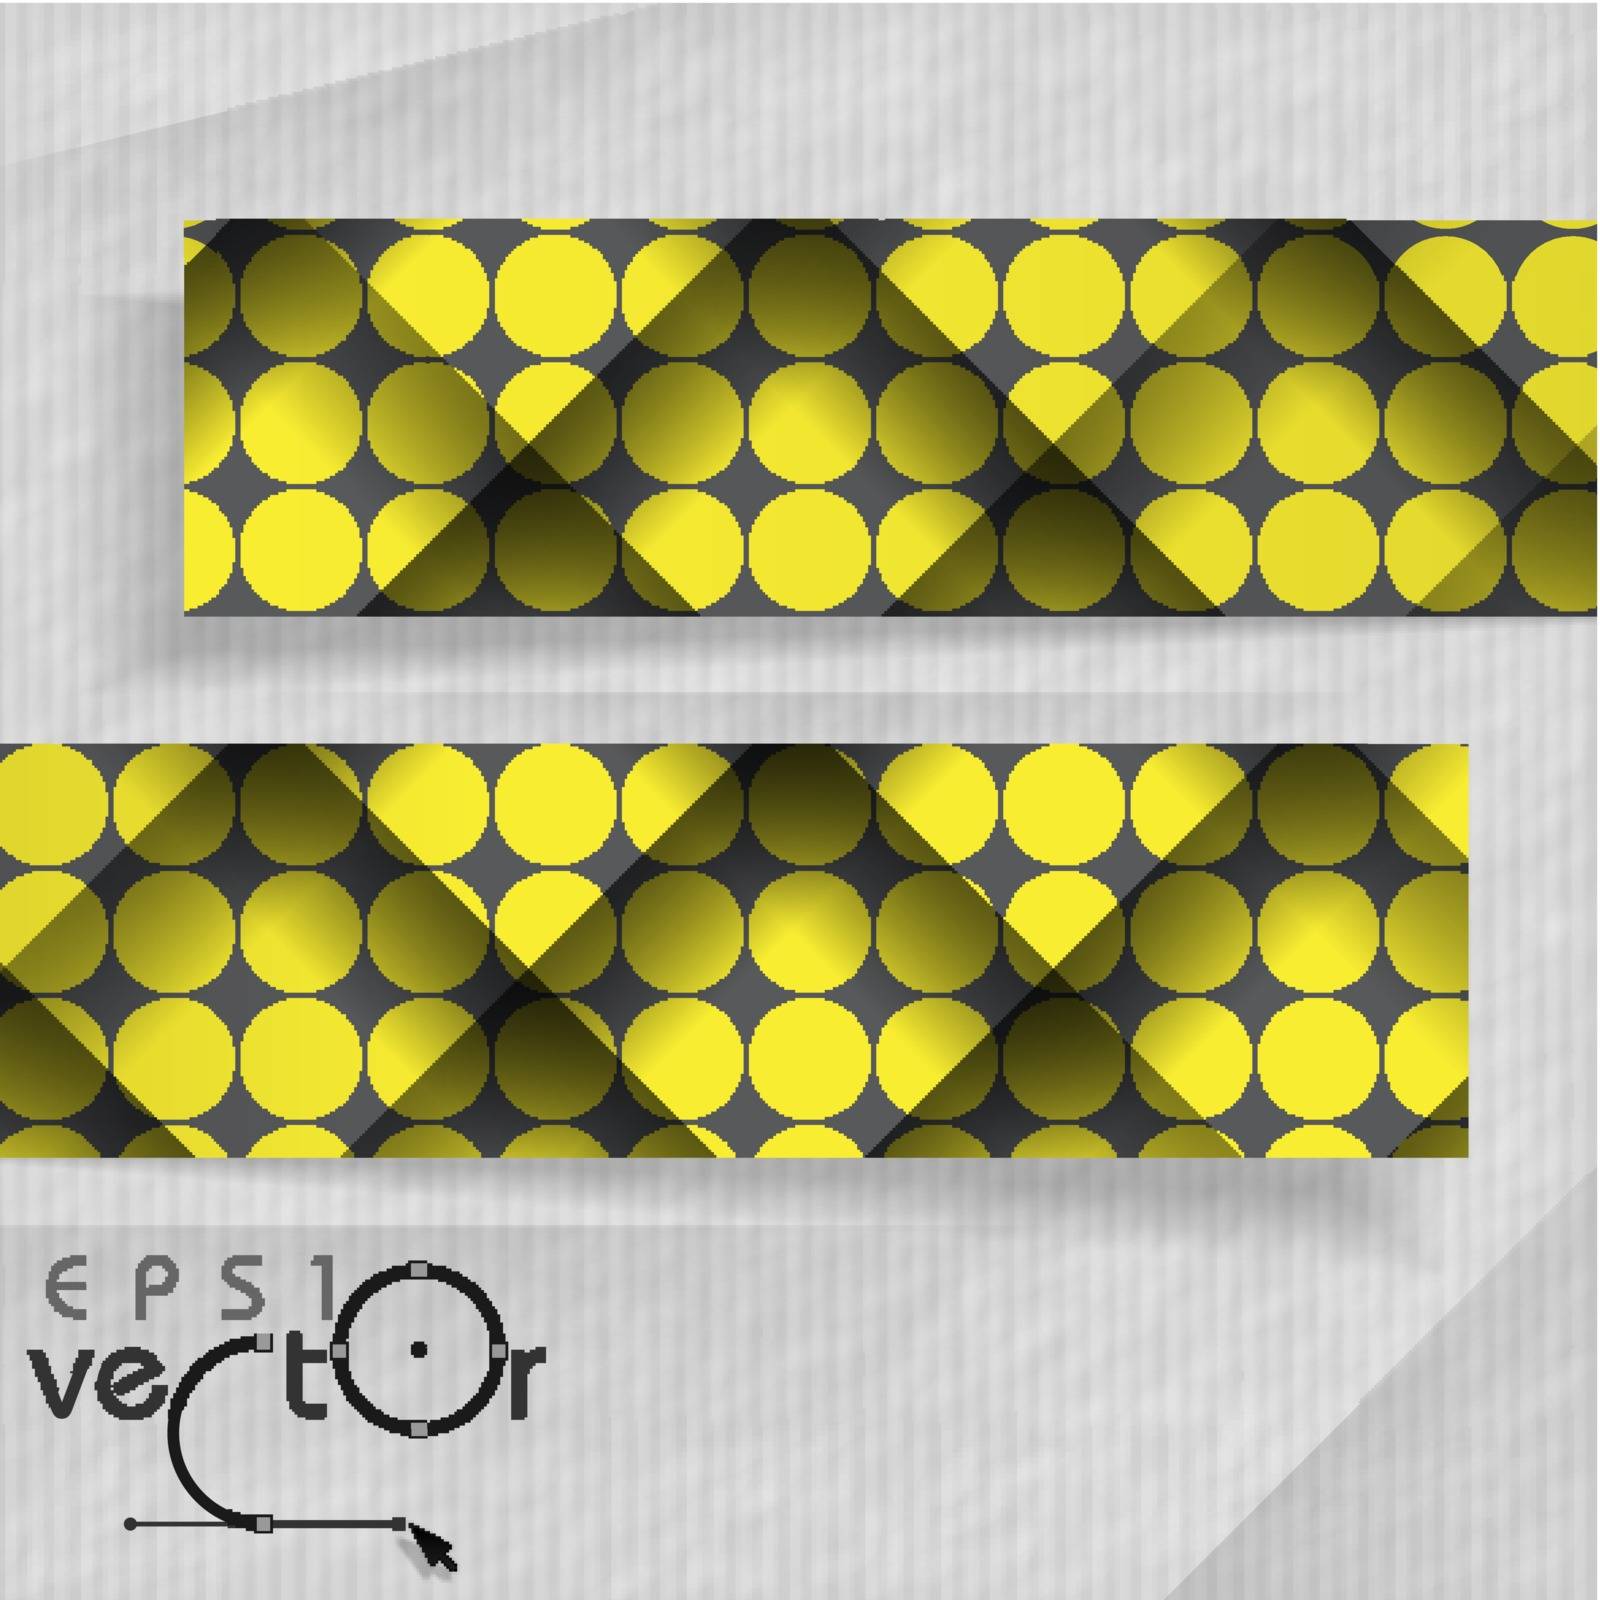 3D Abstract Banners With Place For Your Text. Vector Illustration. Eps 10.